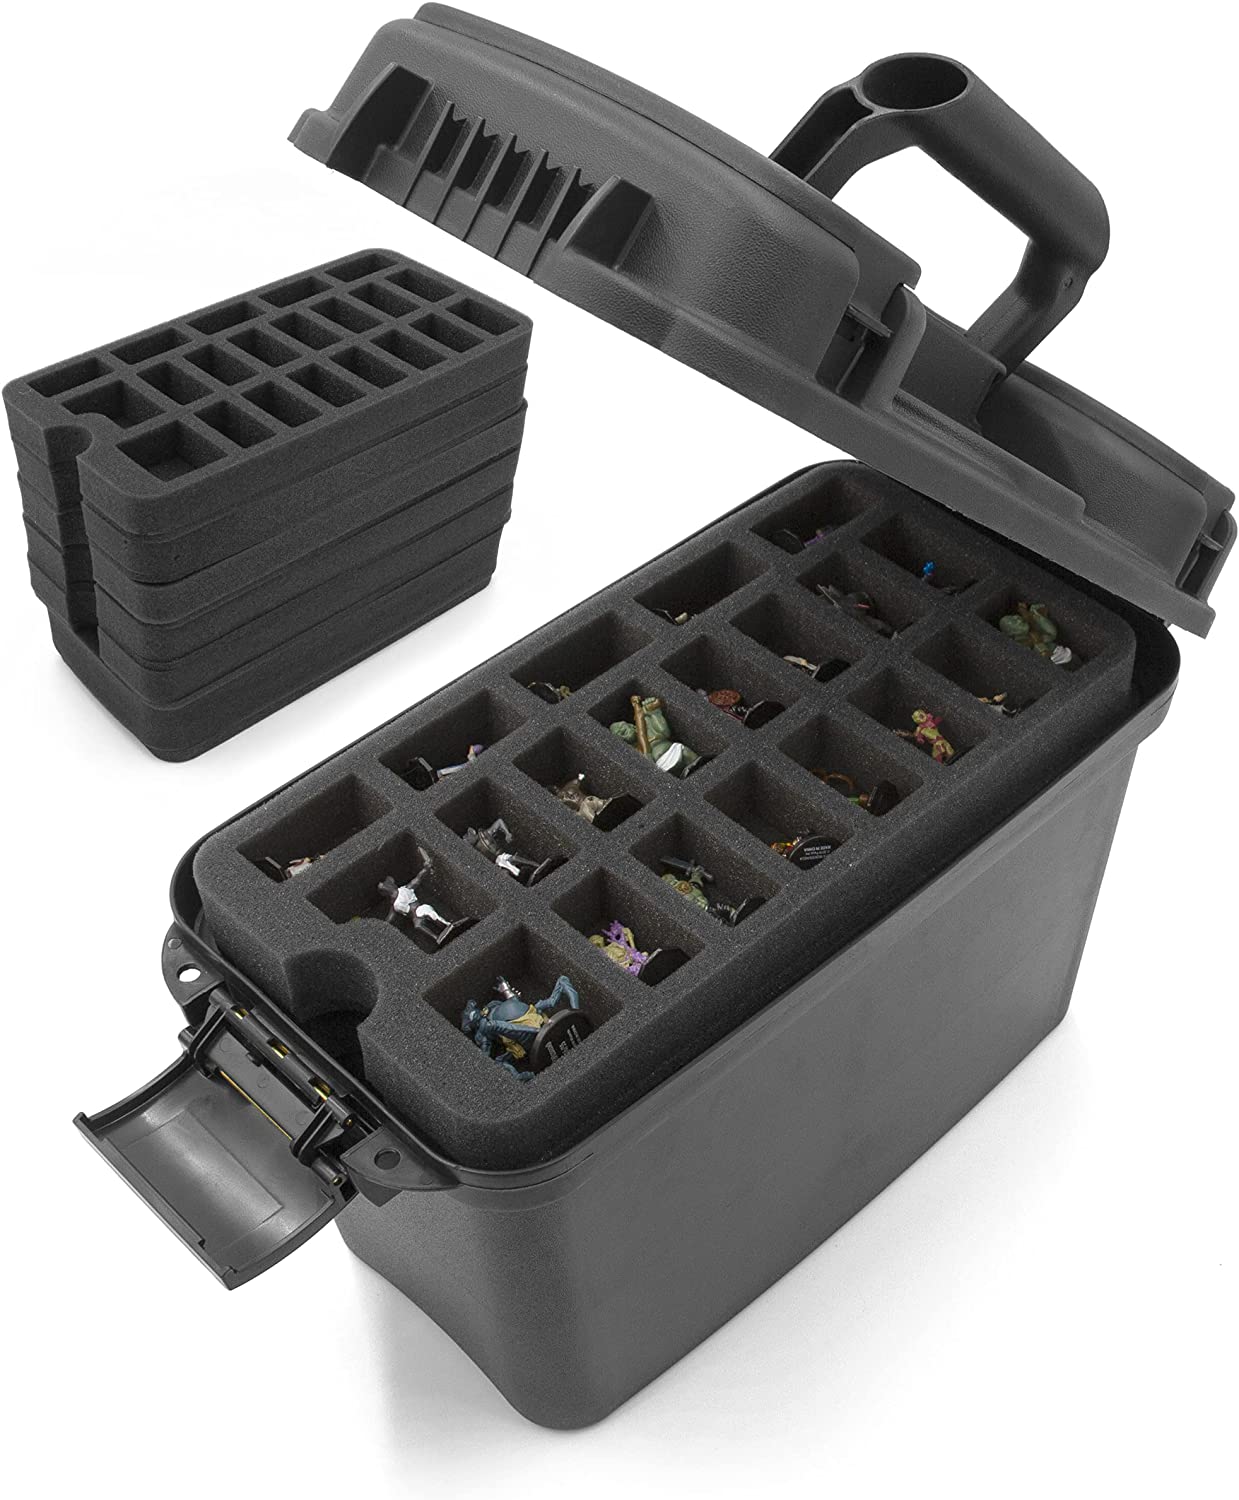 CASEMATIX Miniature Storage Hard Shell Figure Case - 105 Slot Figurine Carrying  Case Compatible with Warhammer 40k, Dungeons & Dragons & More!